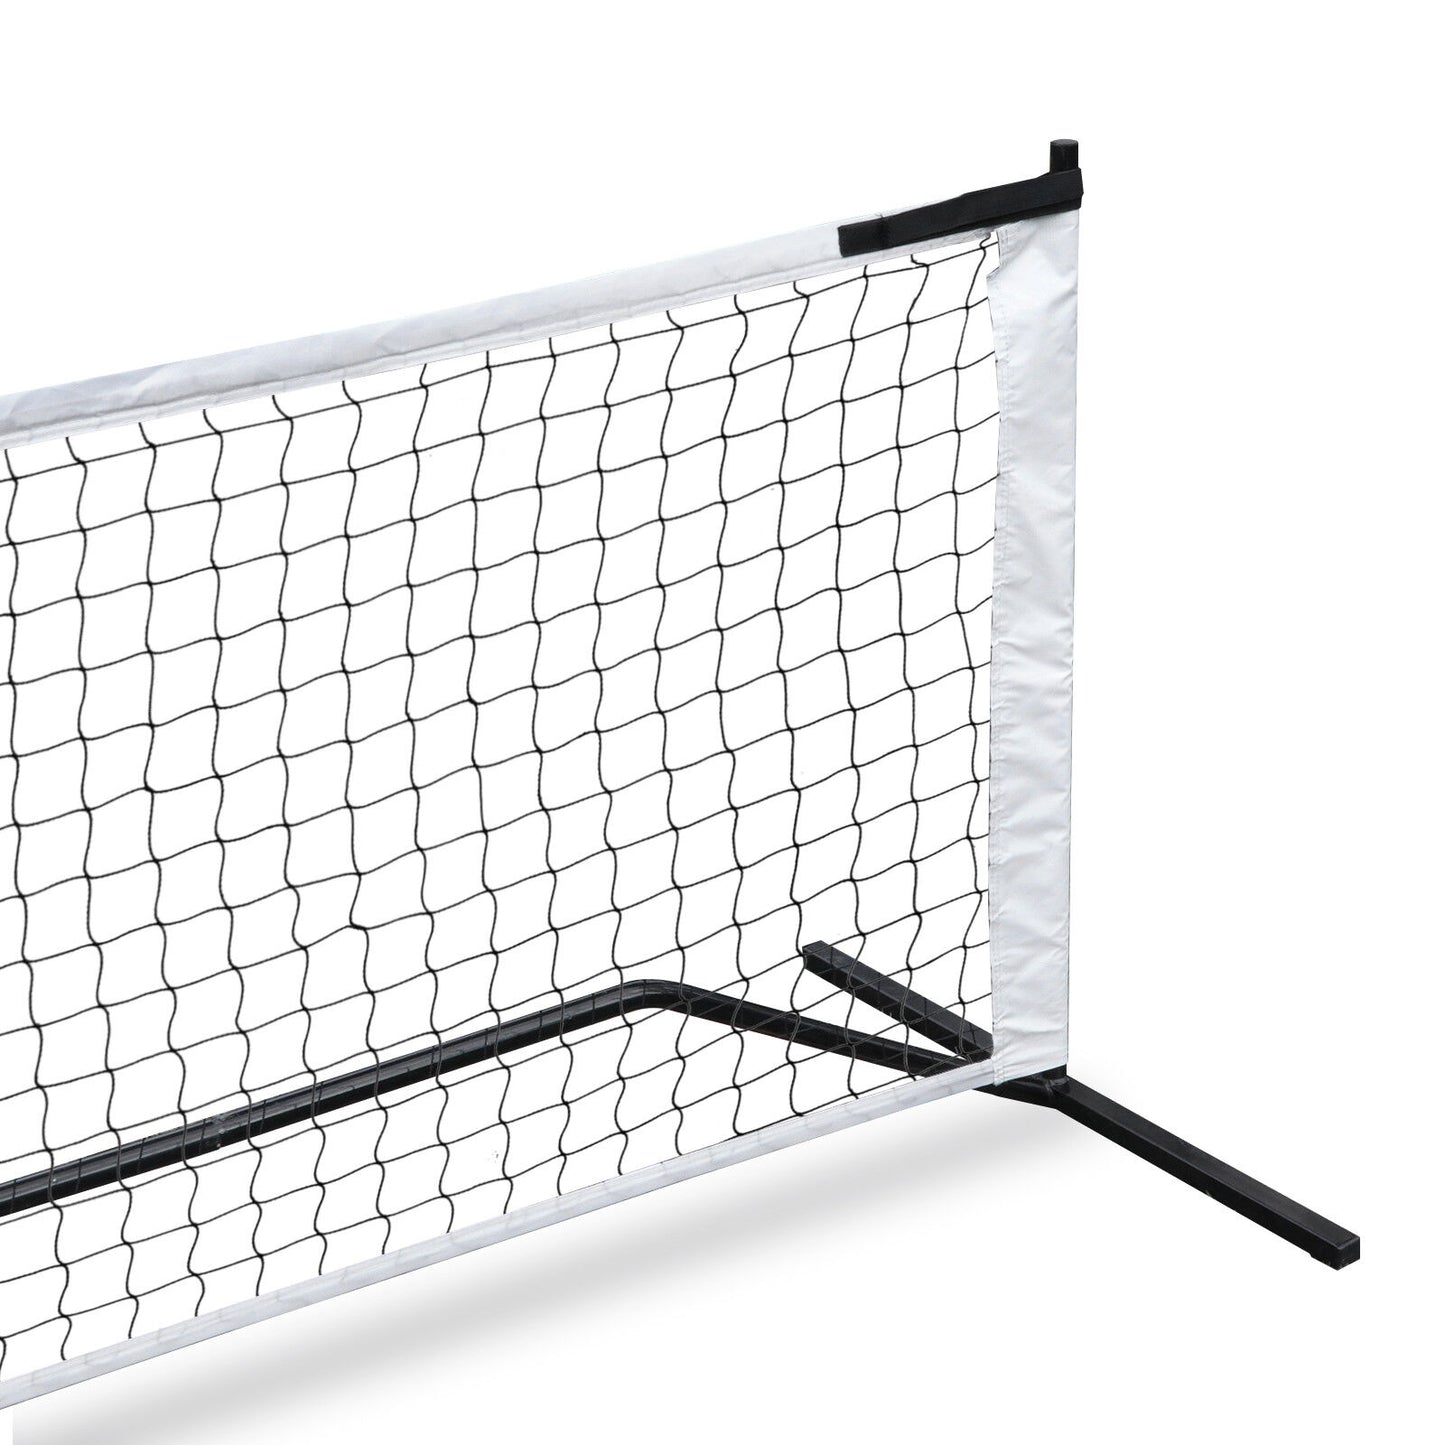 Portable Pickleball Game Tennis Net Powder Coated Frame Yard w/ Carry Bag&Stakes